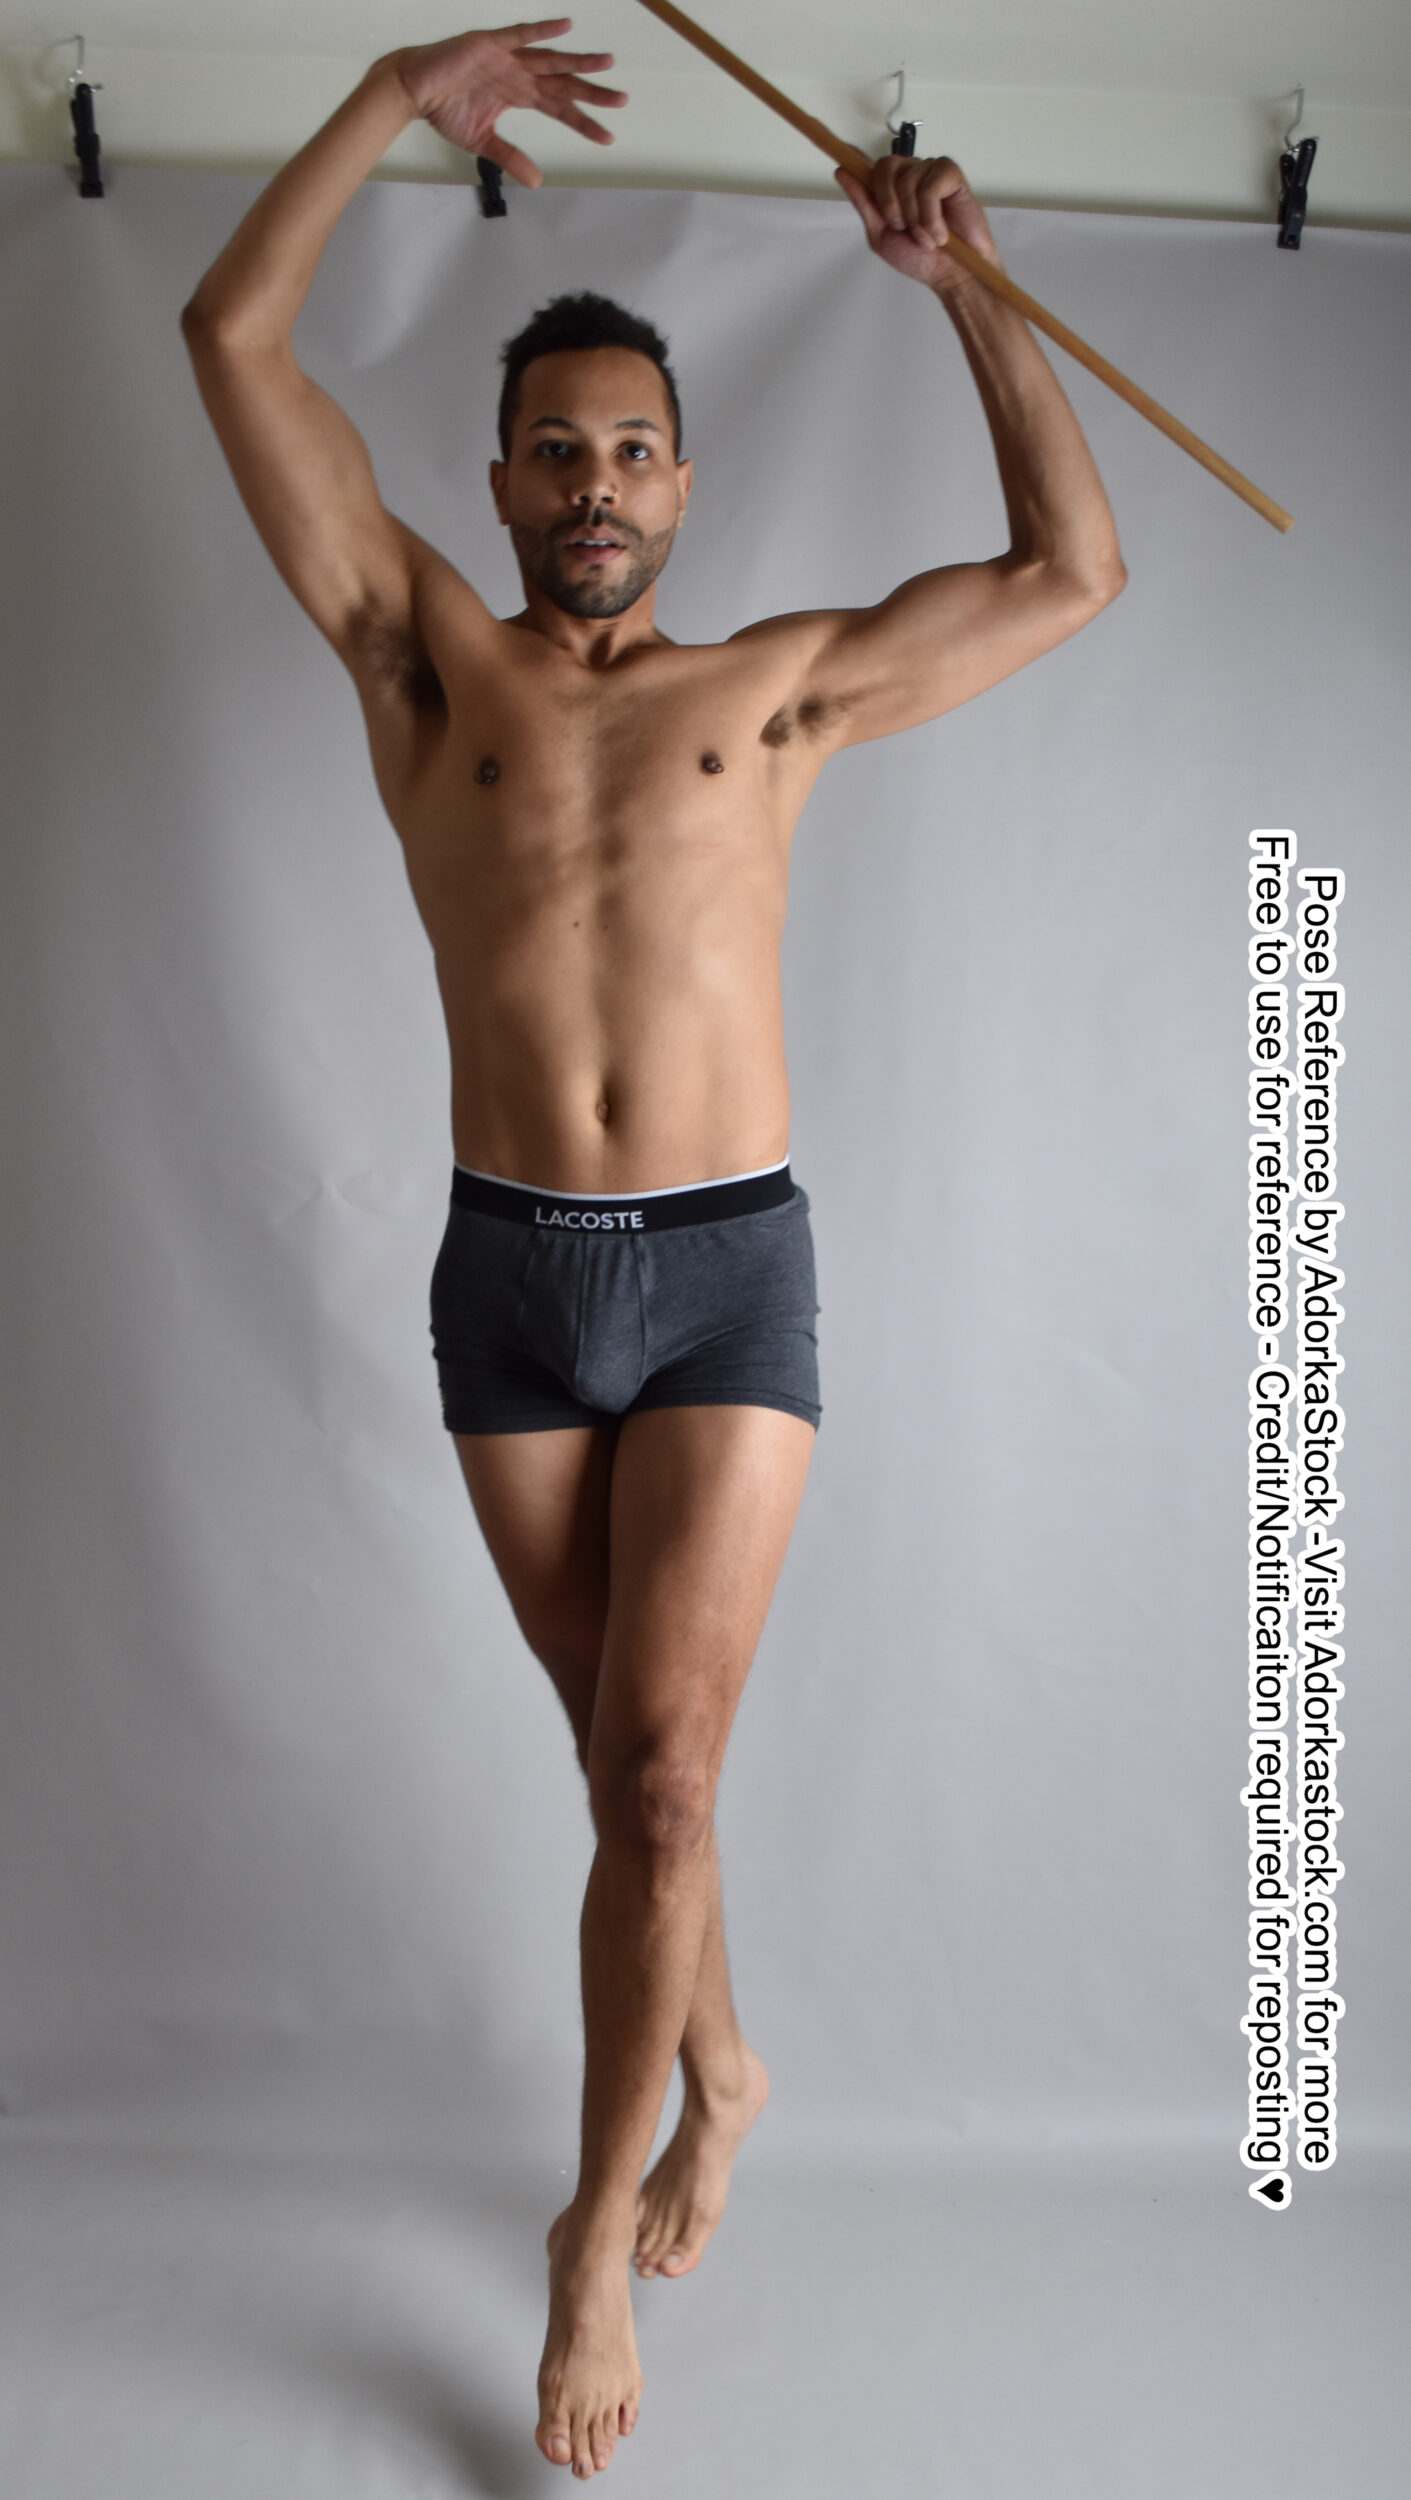 Thin, Latino, male pose reference model in jumping pose with toes pointed, hands over head, holding a staff.